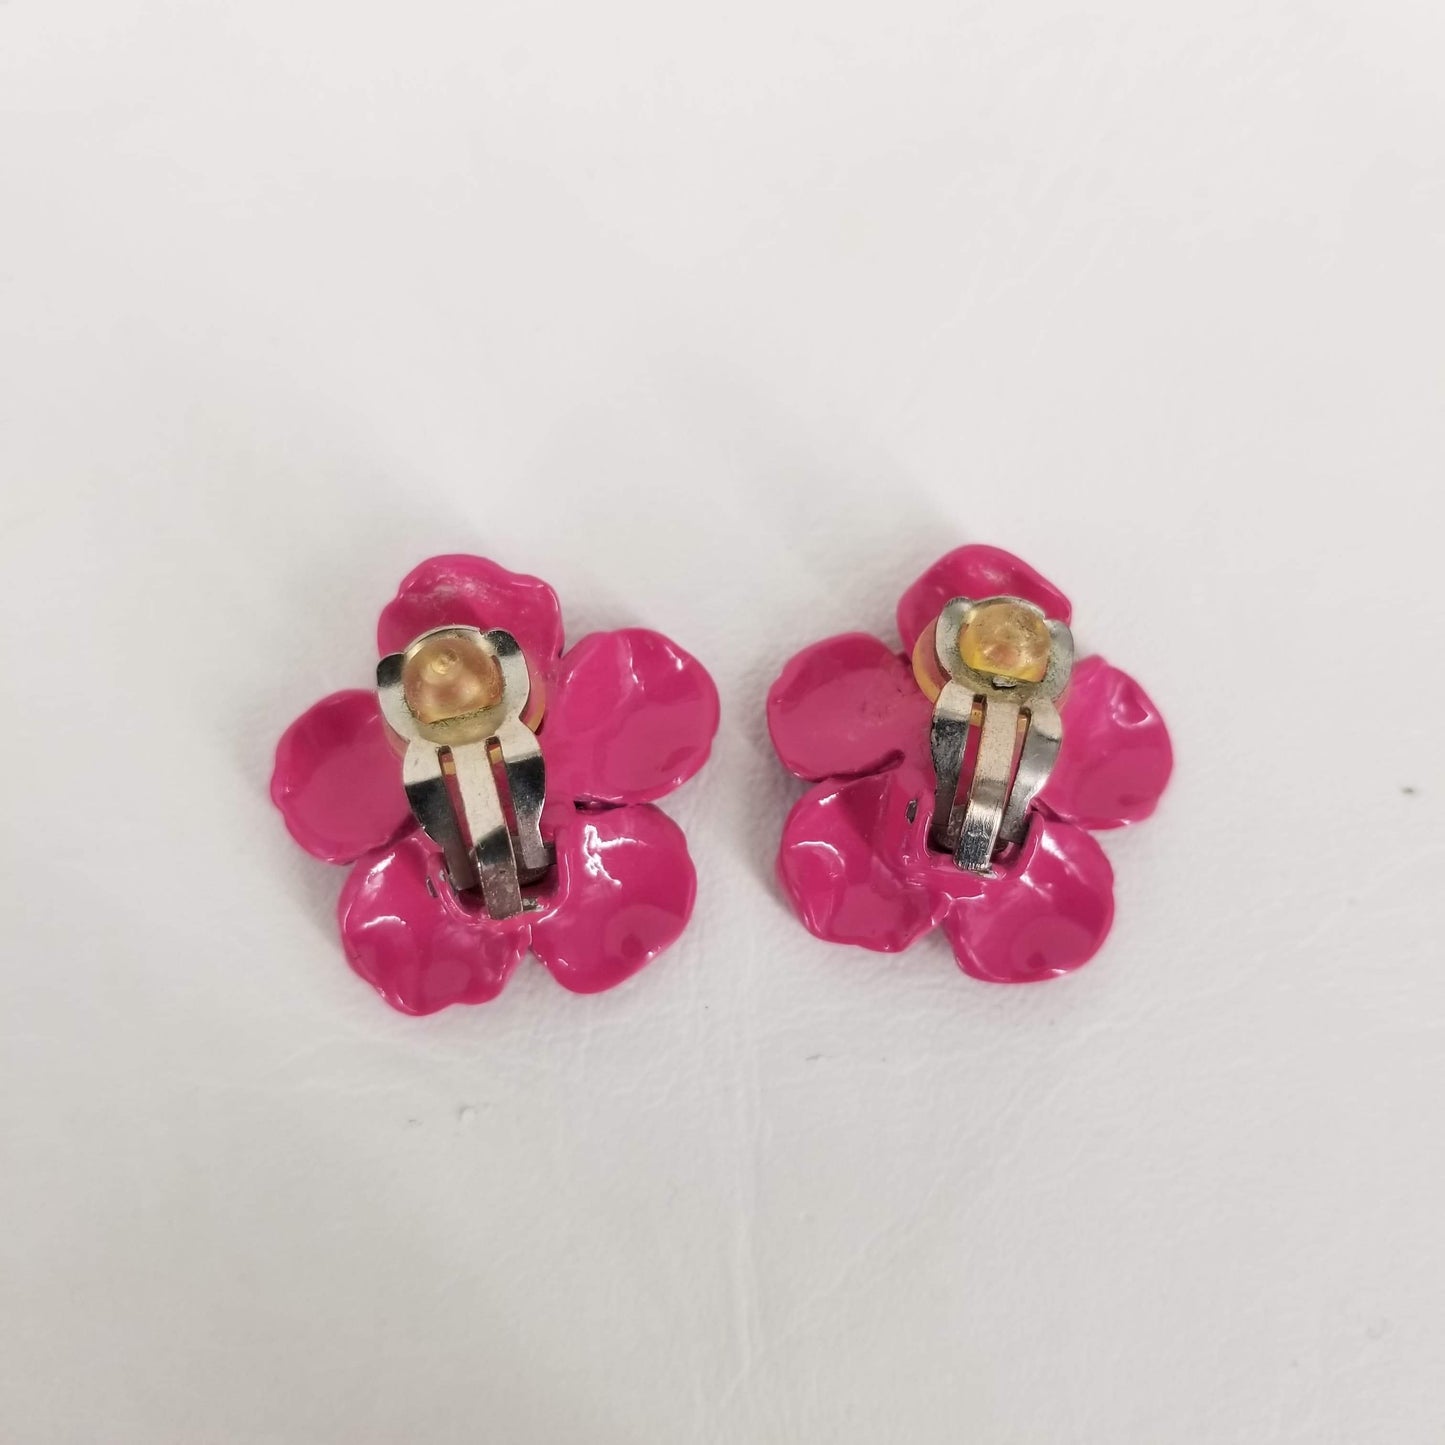 Authentic Chanel Fuchsia Pink Flower Clip-on Earrings